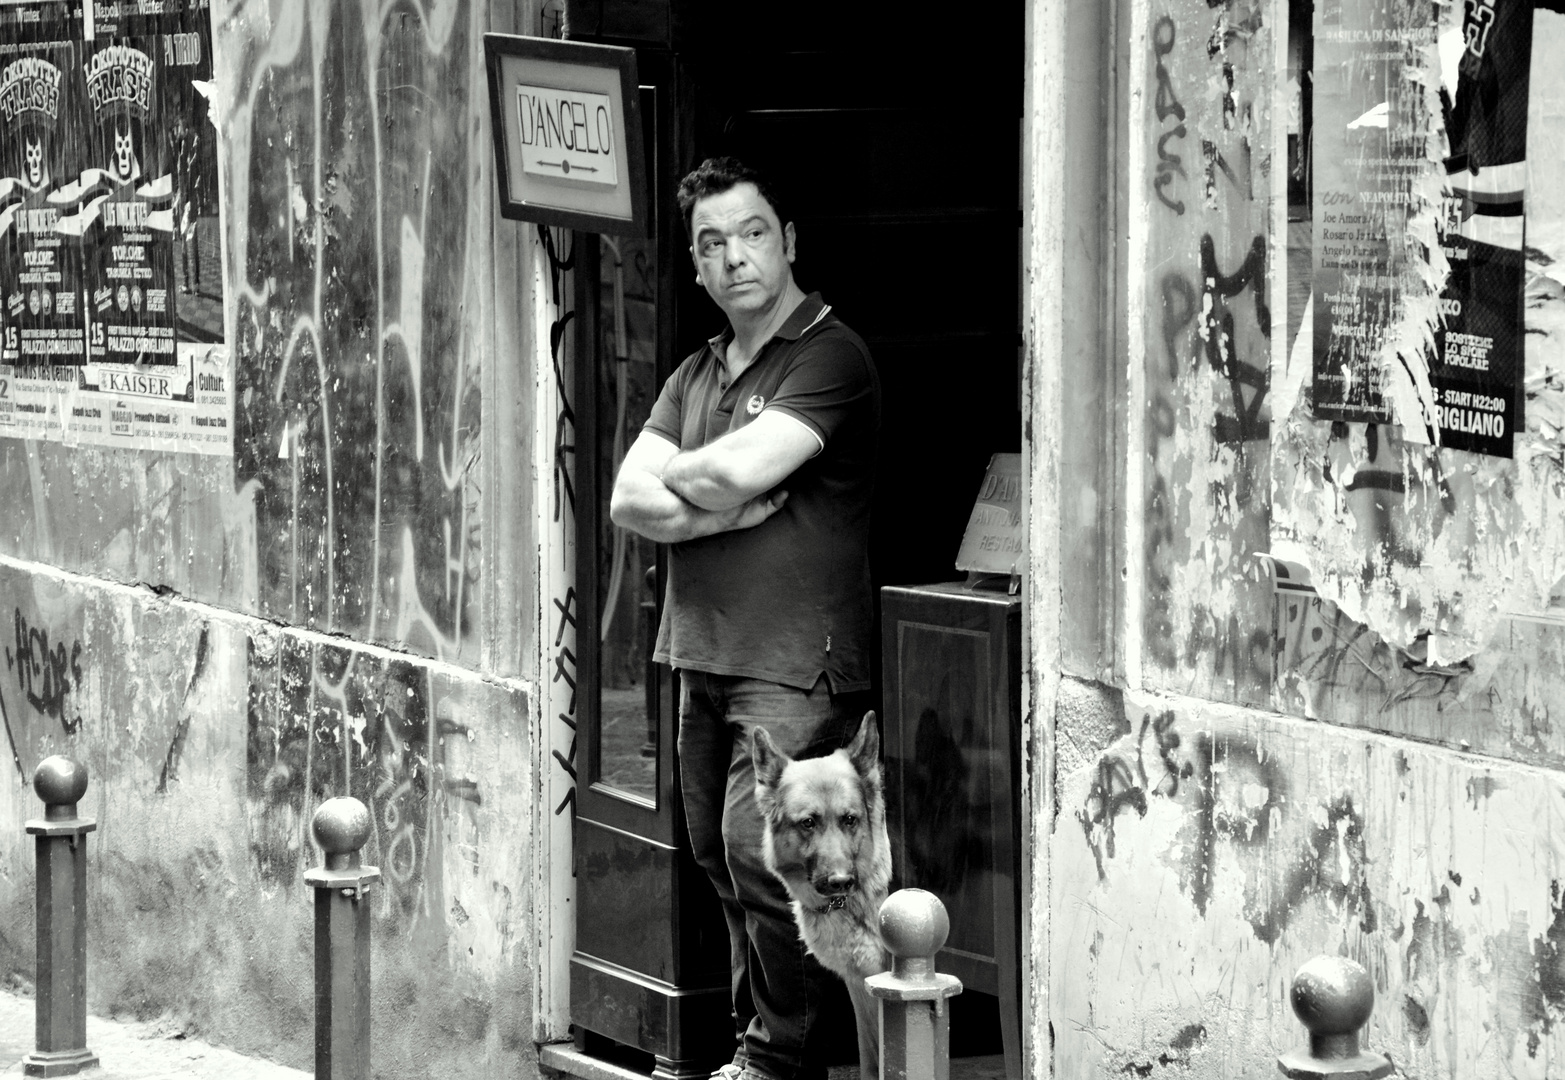 The two shopowners waiting for customers. Napoli